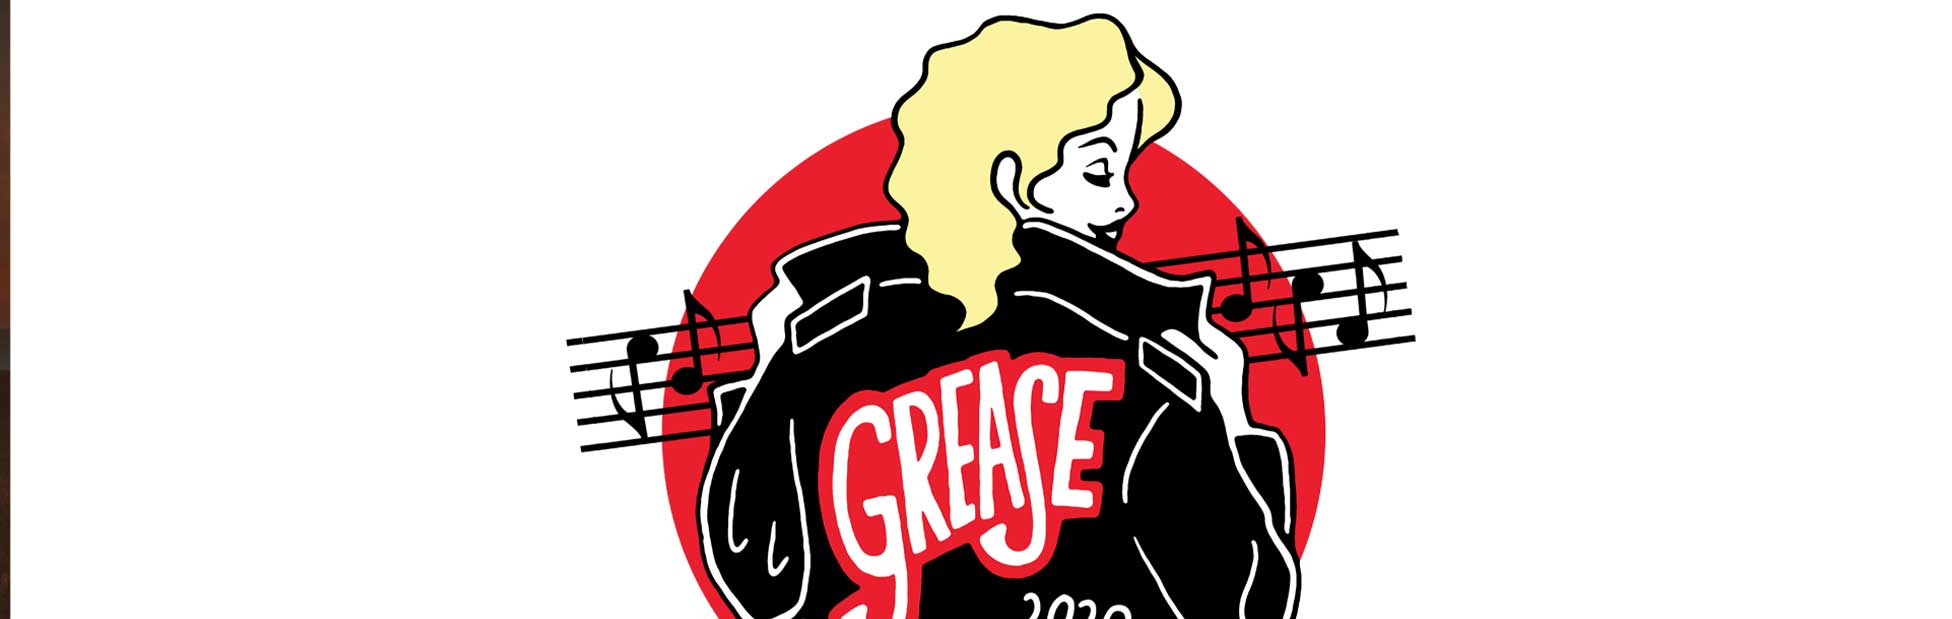 Cartoon person with Grease on back of jacket